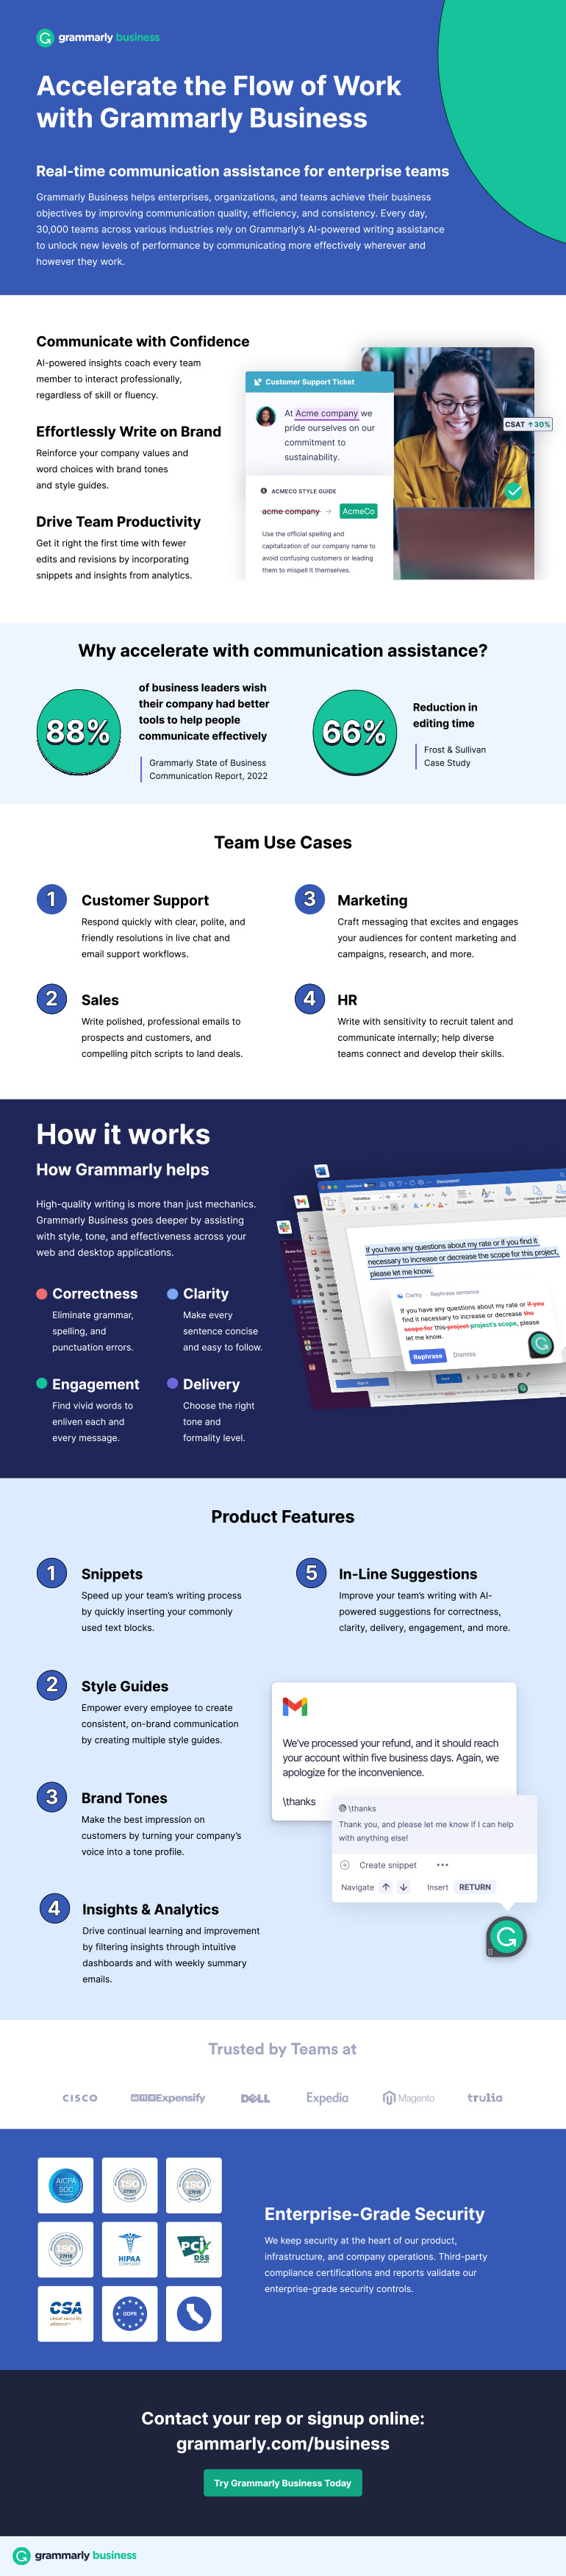 Accelerate the Flow of Work With Grammarly Business